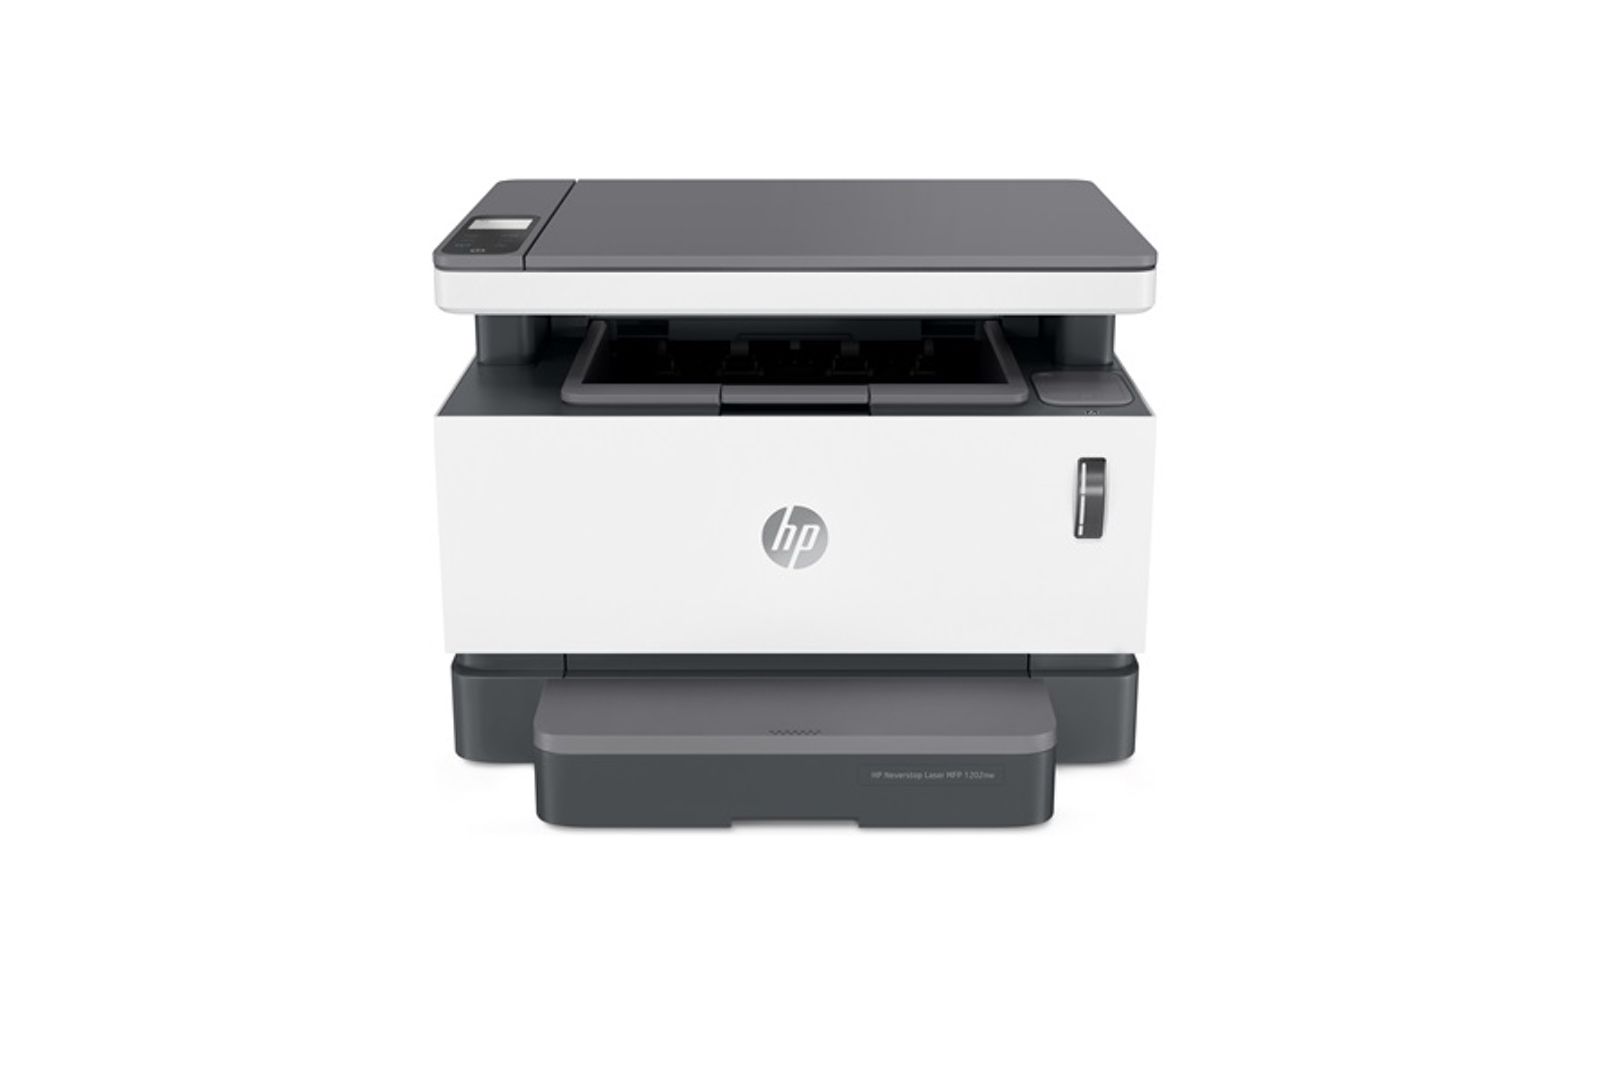 HP's weekly deals have some real gems to grab with discounts photo 5